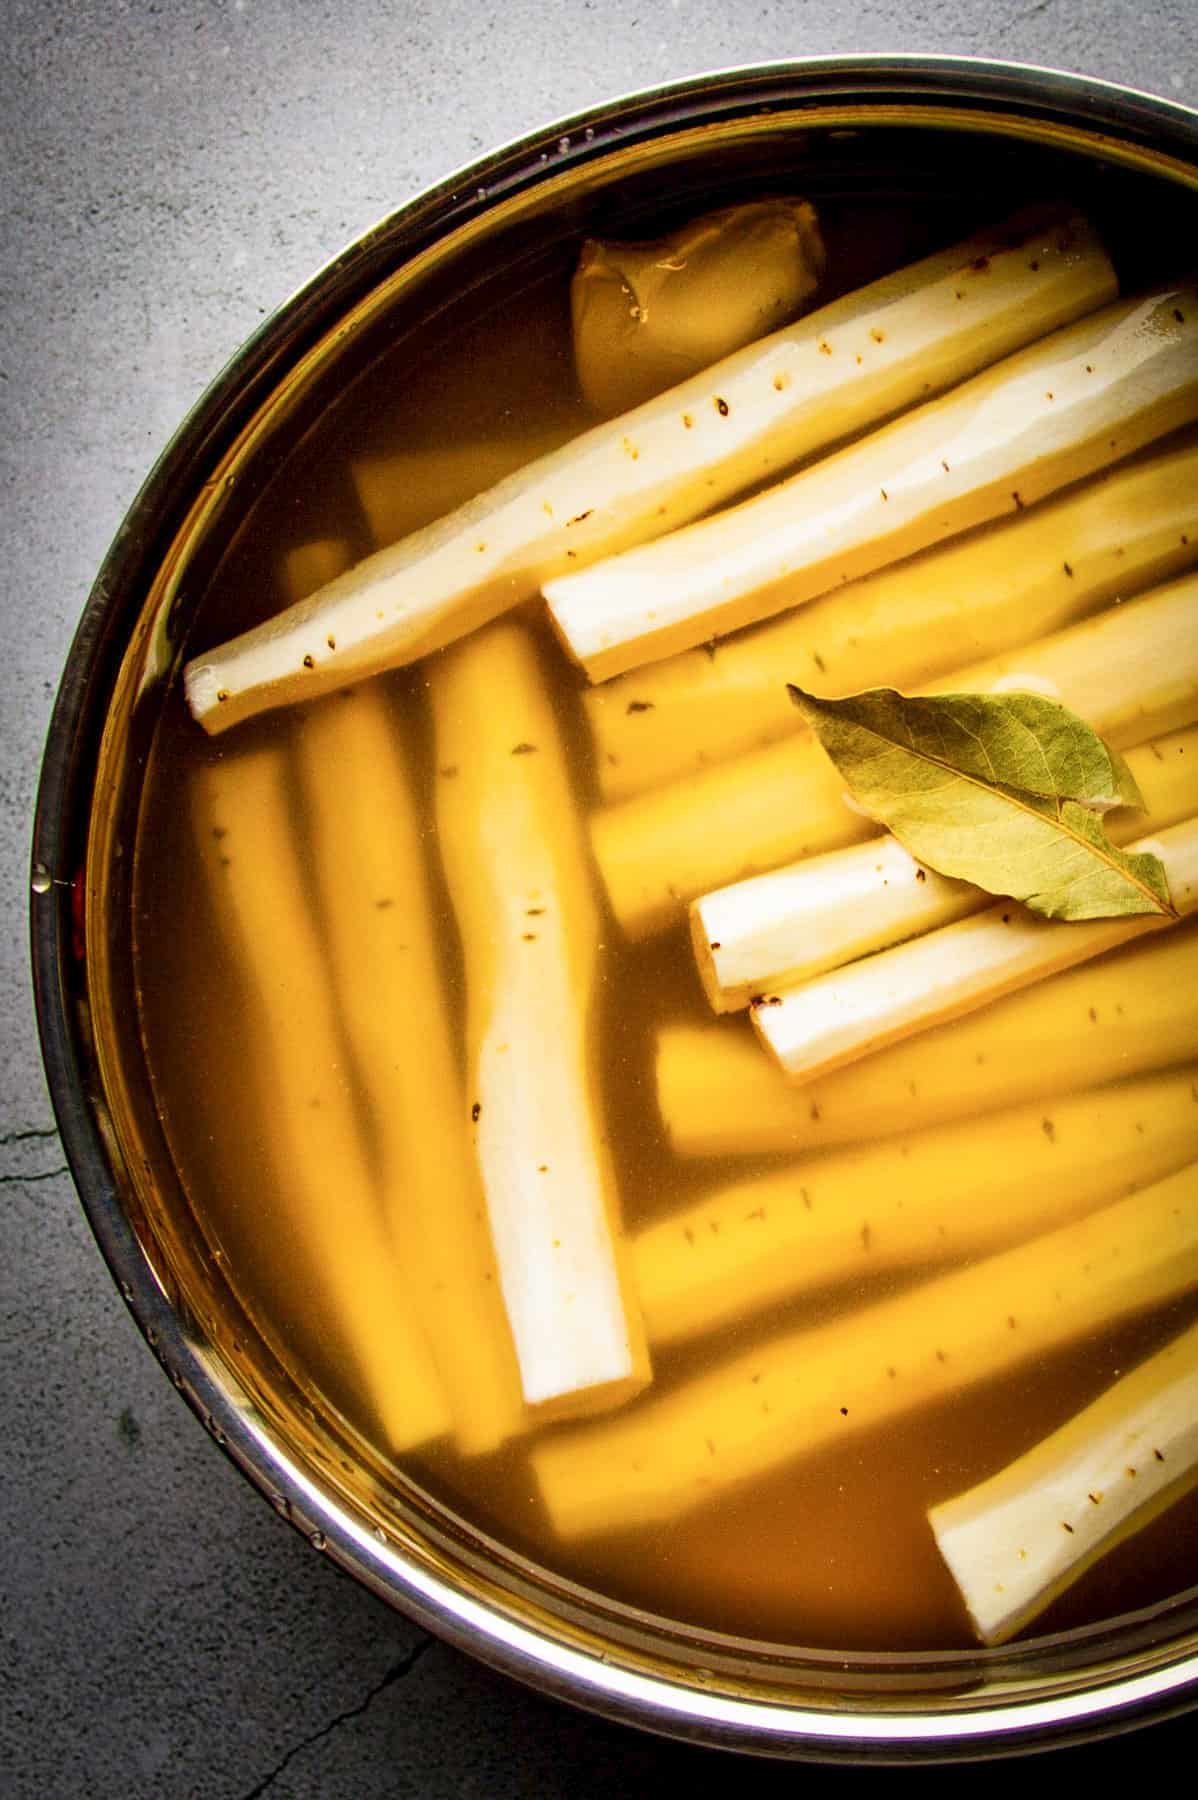 Braised black salsify in a pot.